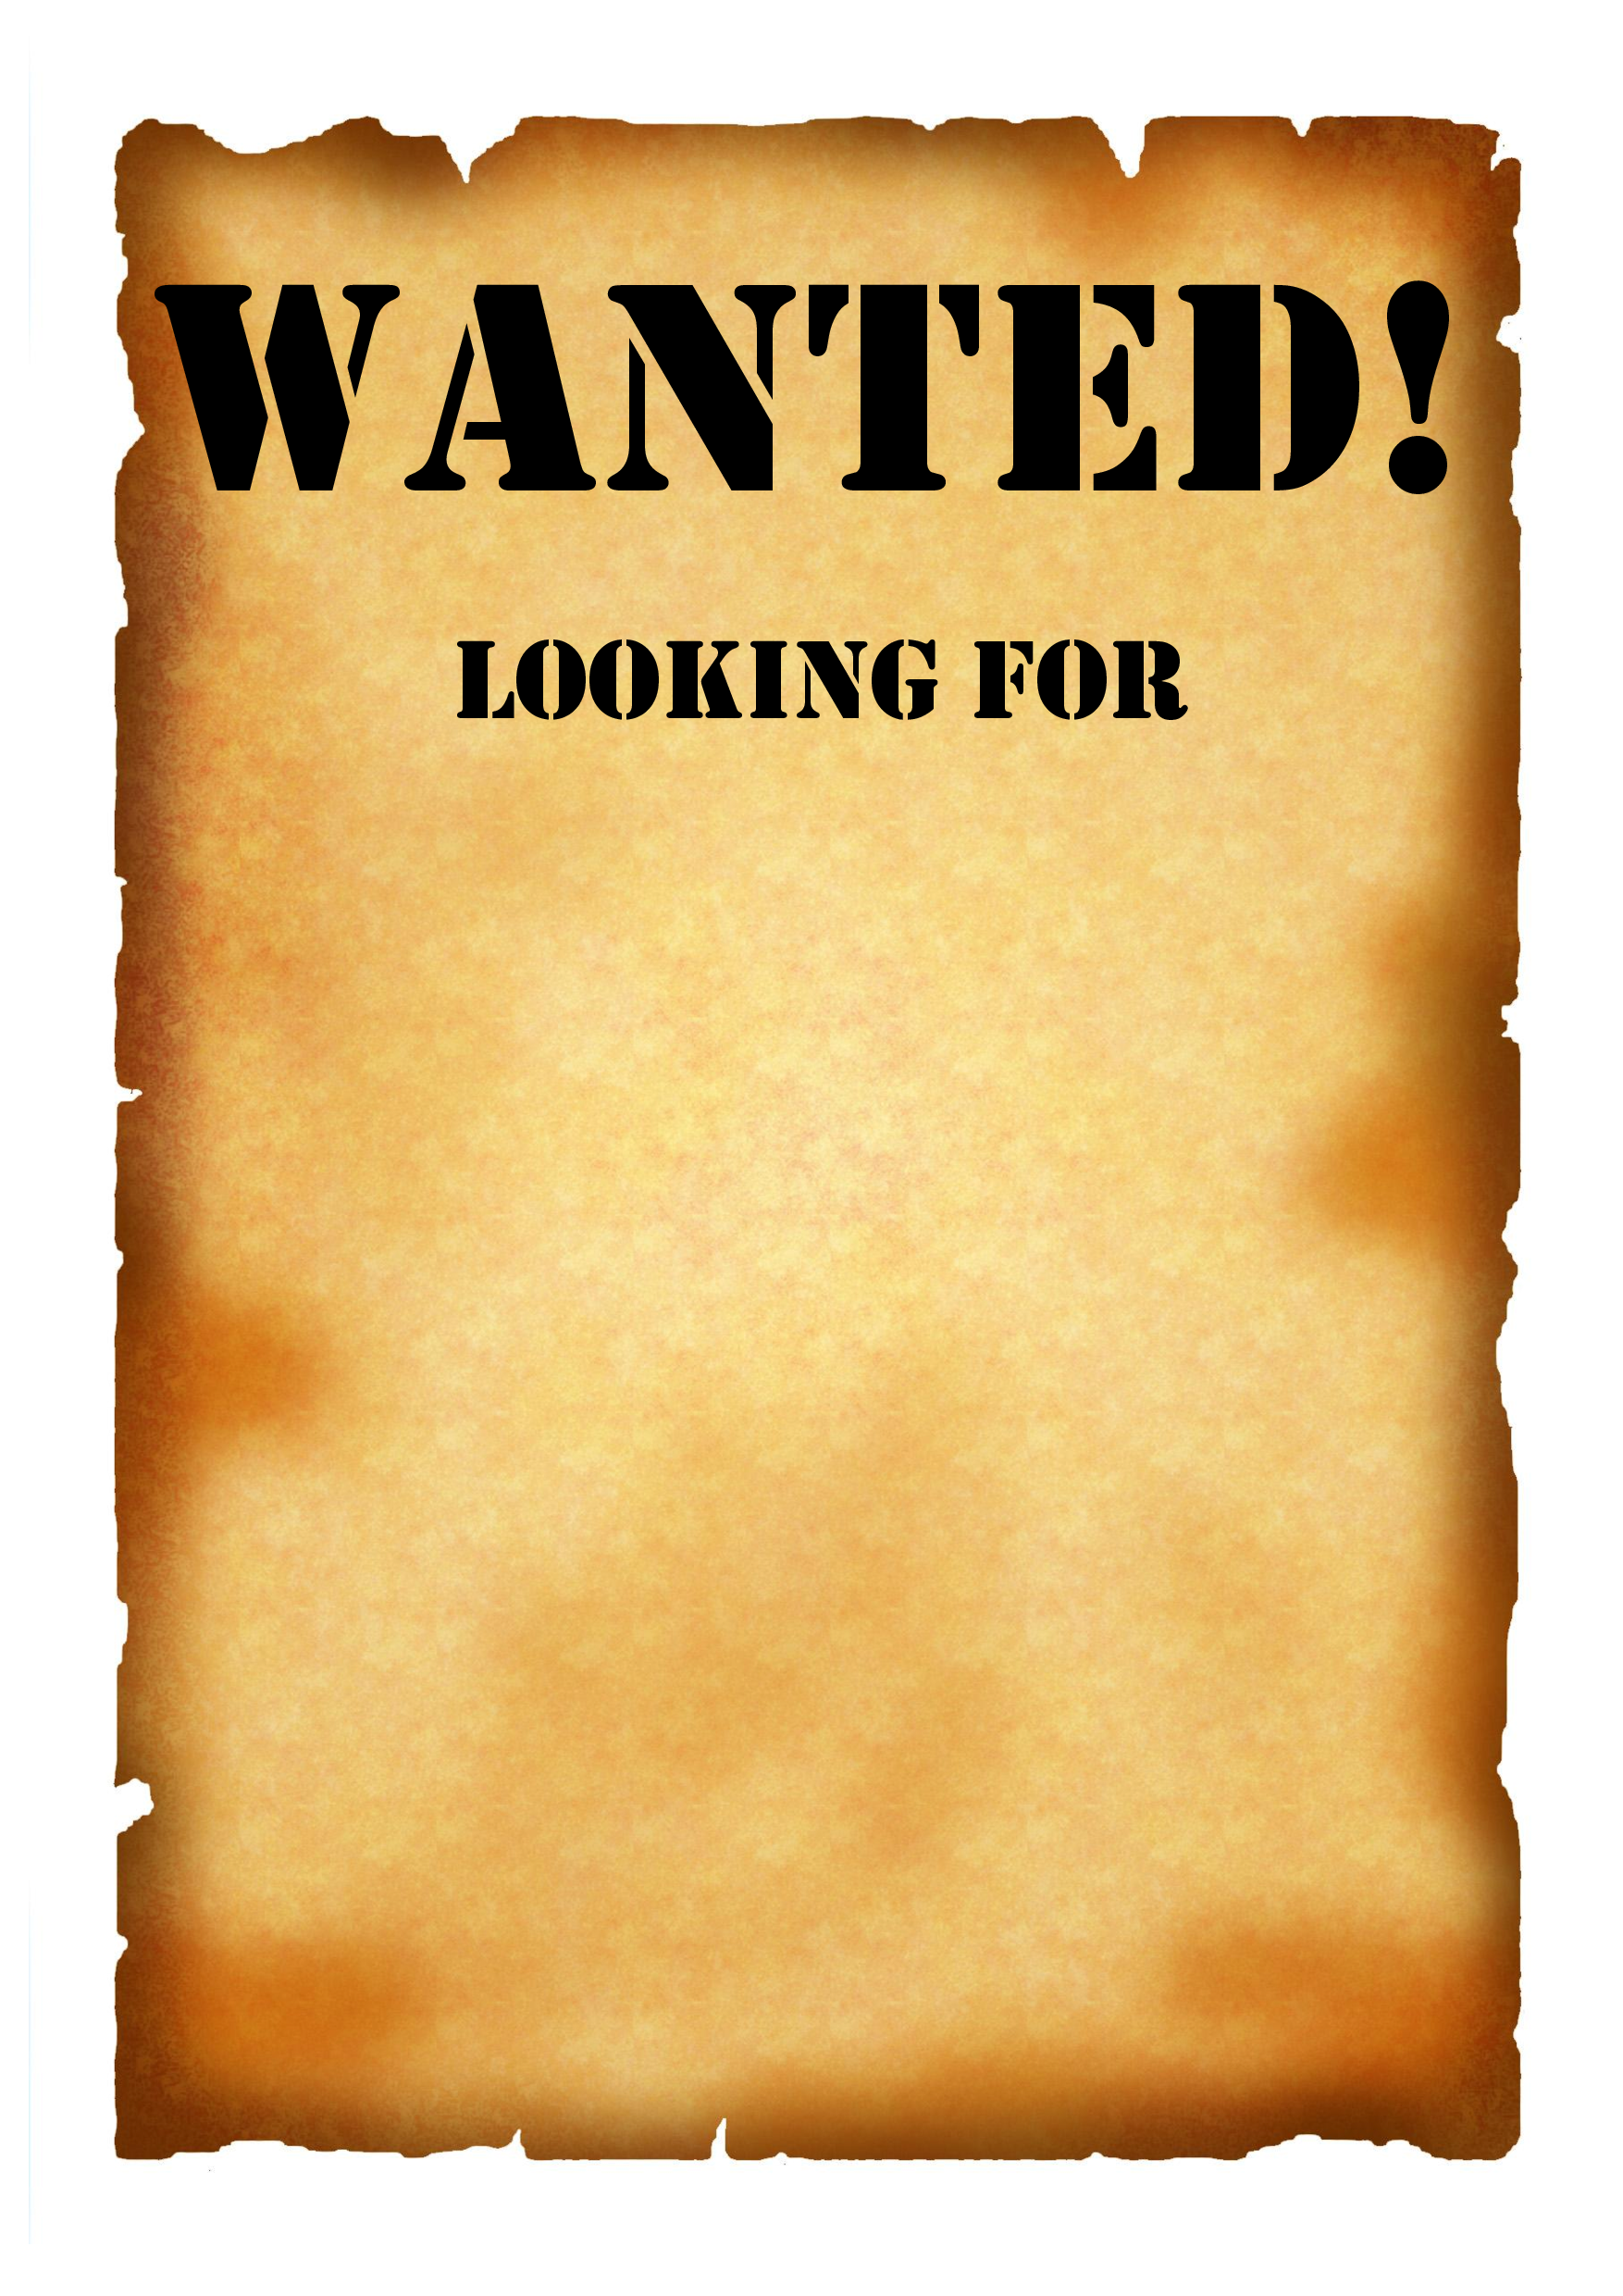 Amazing Wanted Pictures & Backgrounds